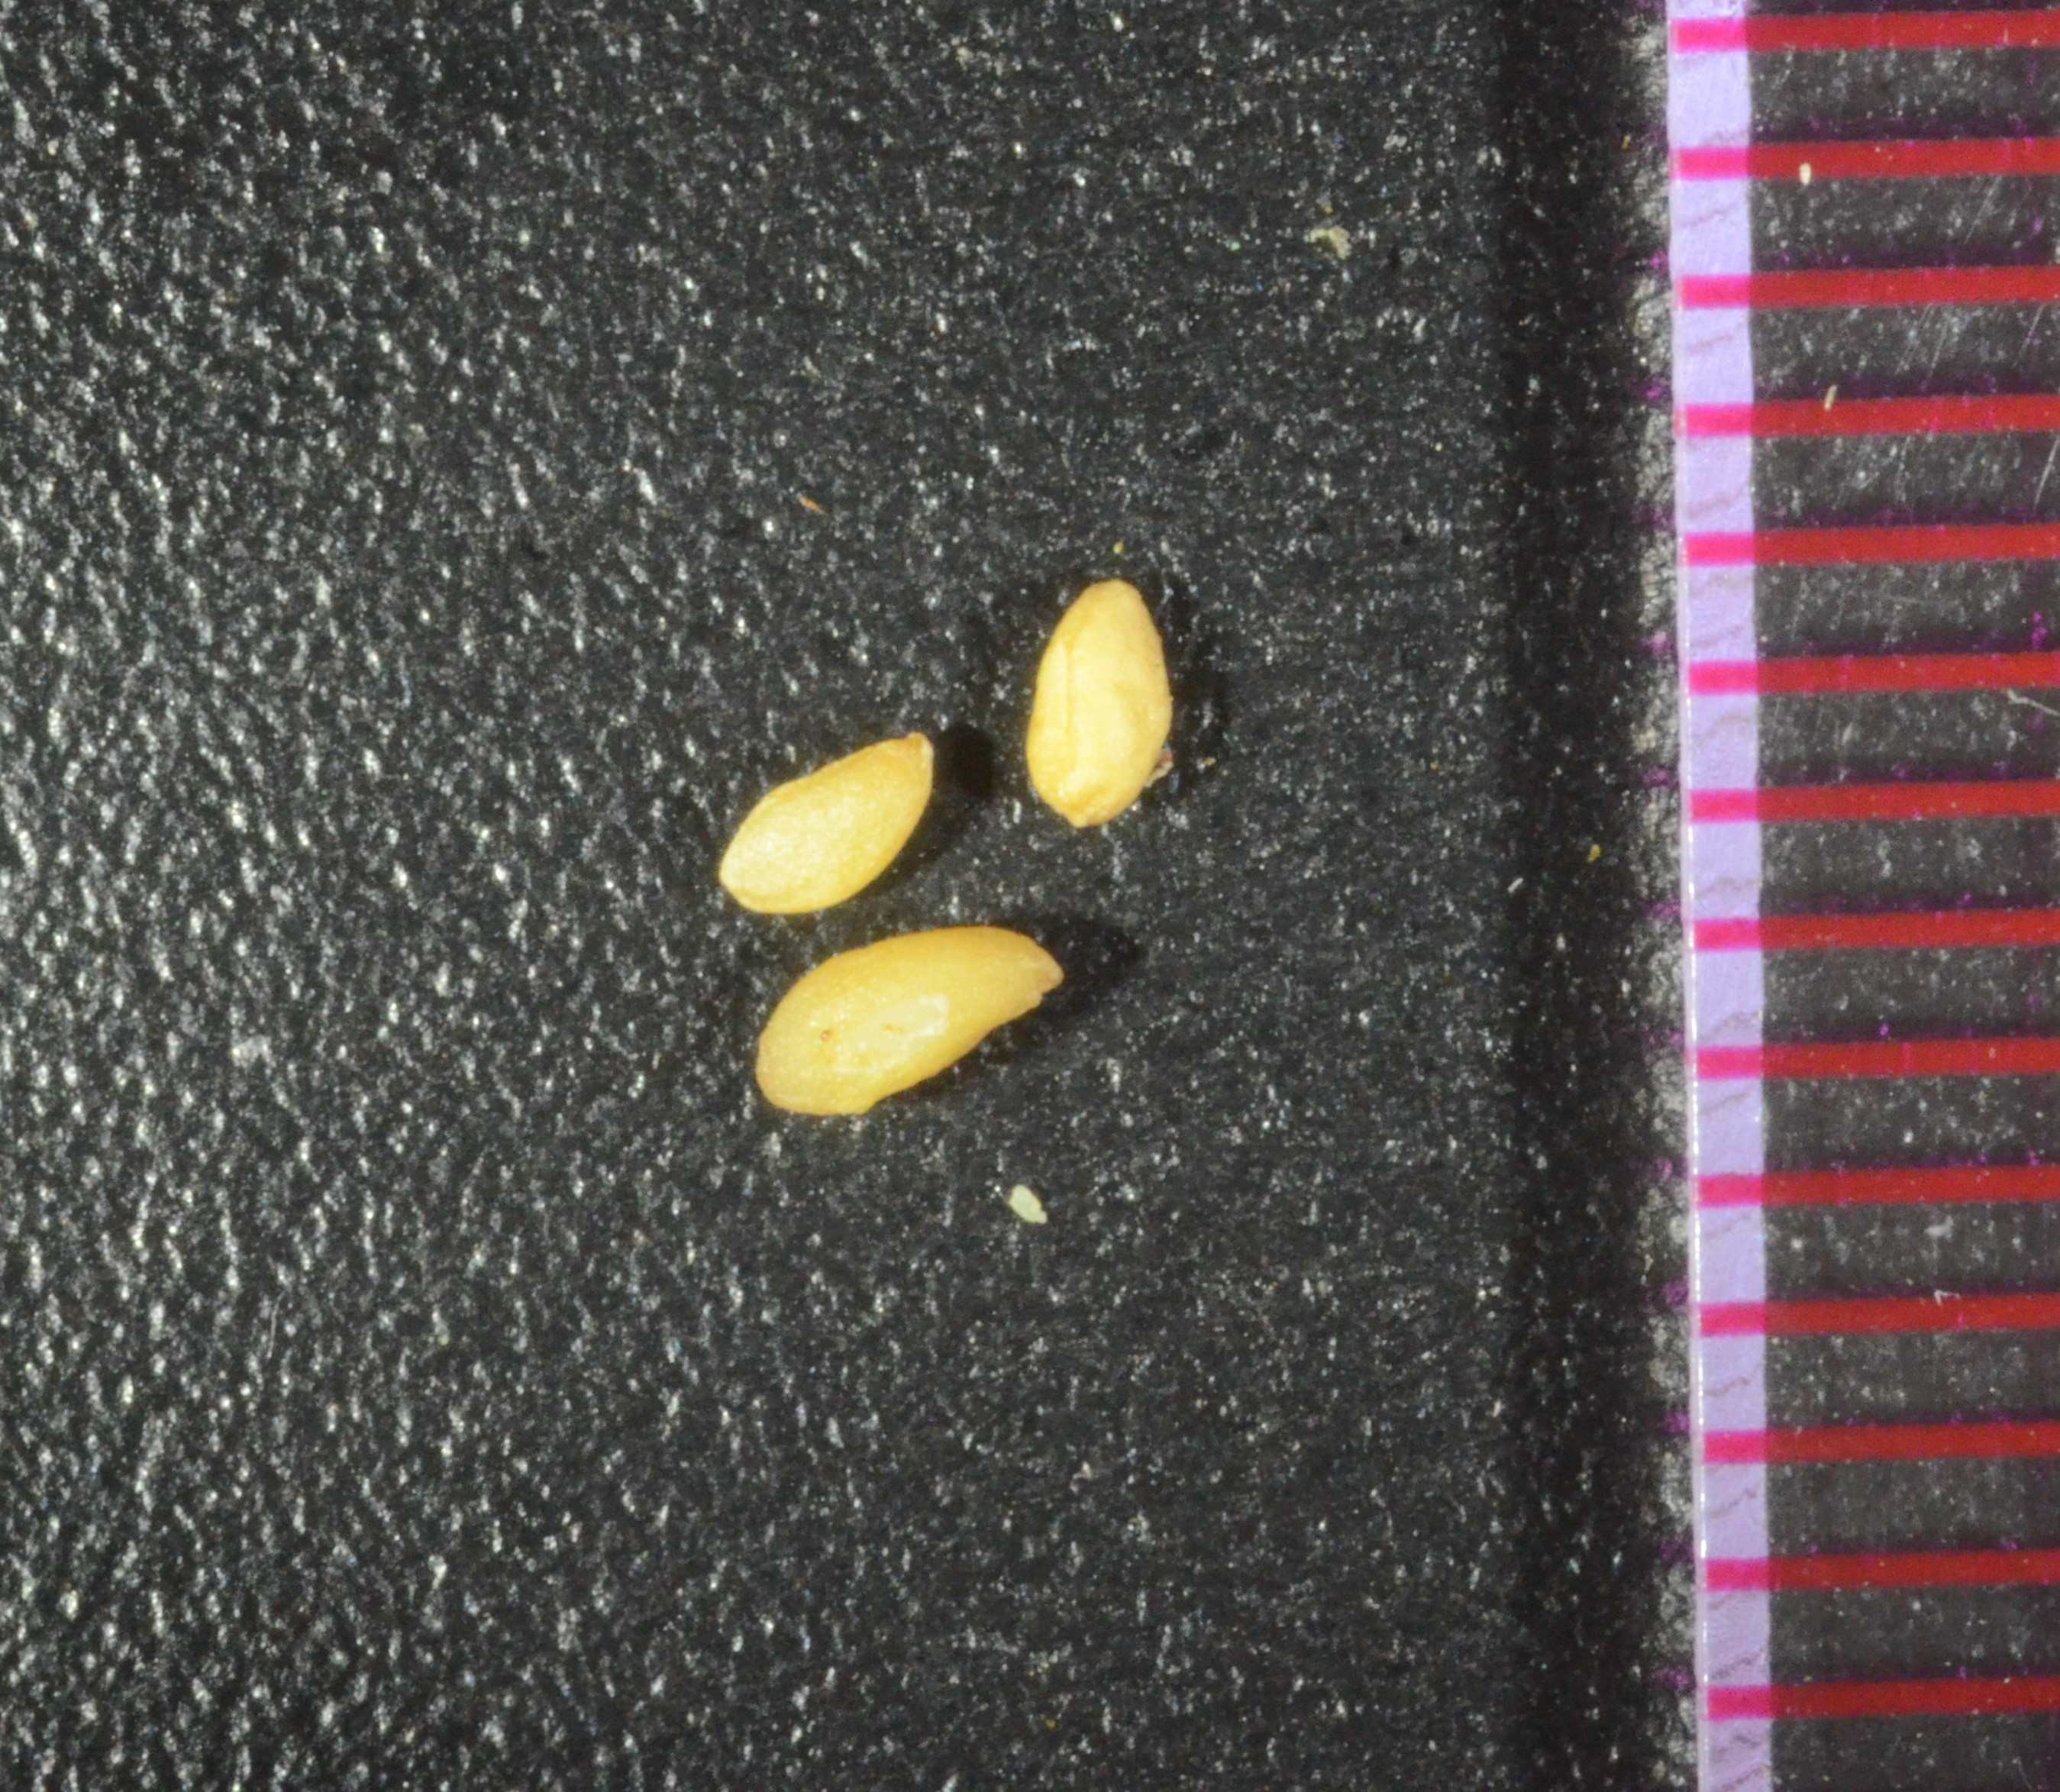 Linnaea borealis seeds with a mm ruler on the right.